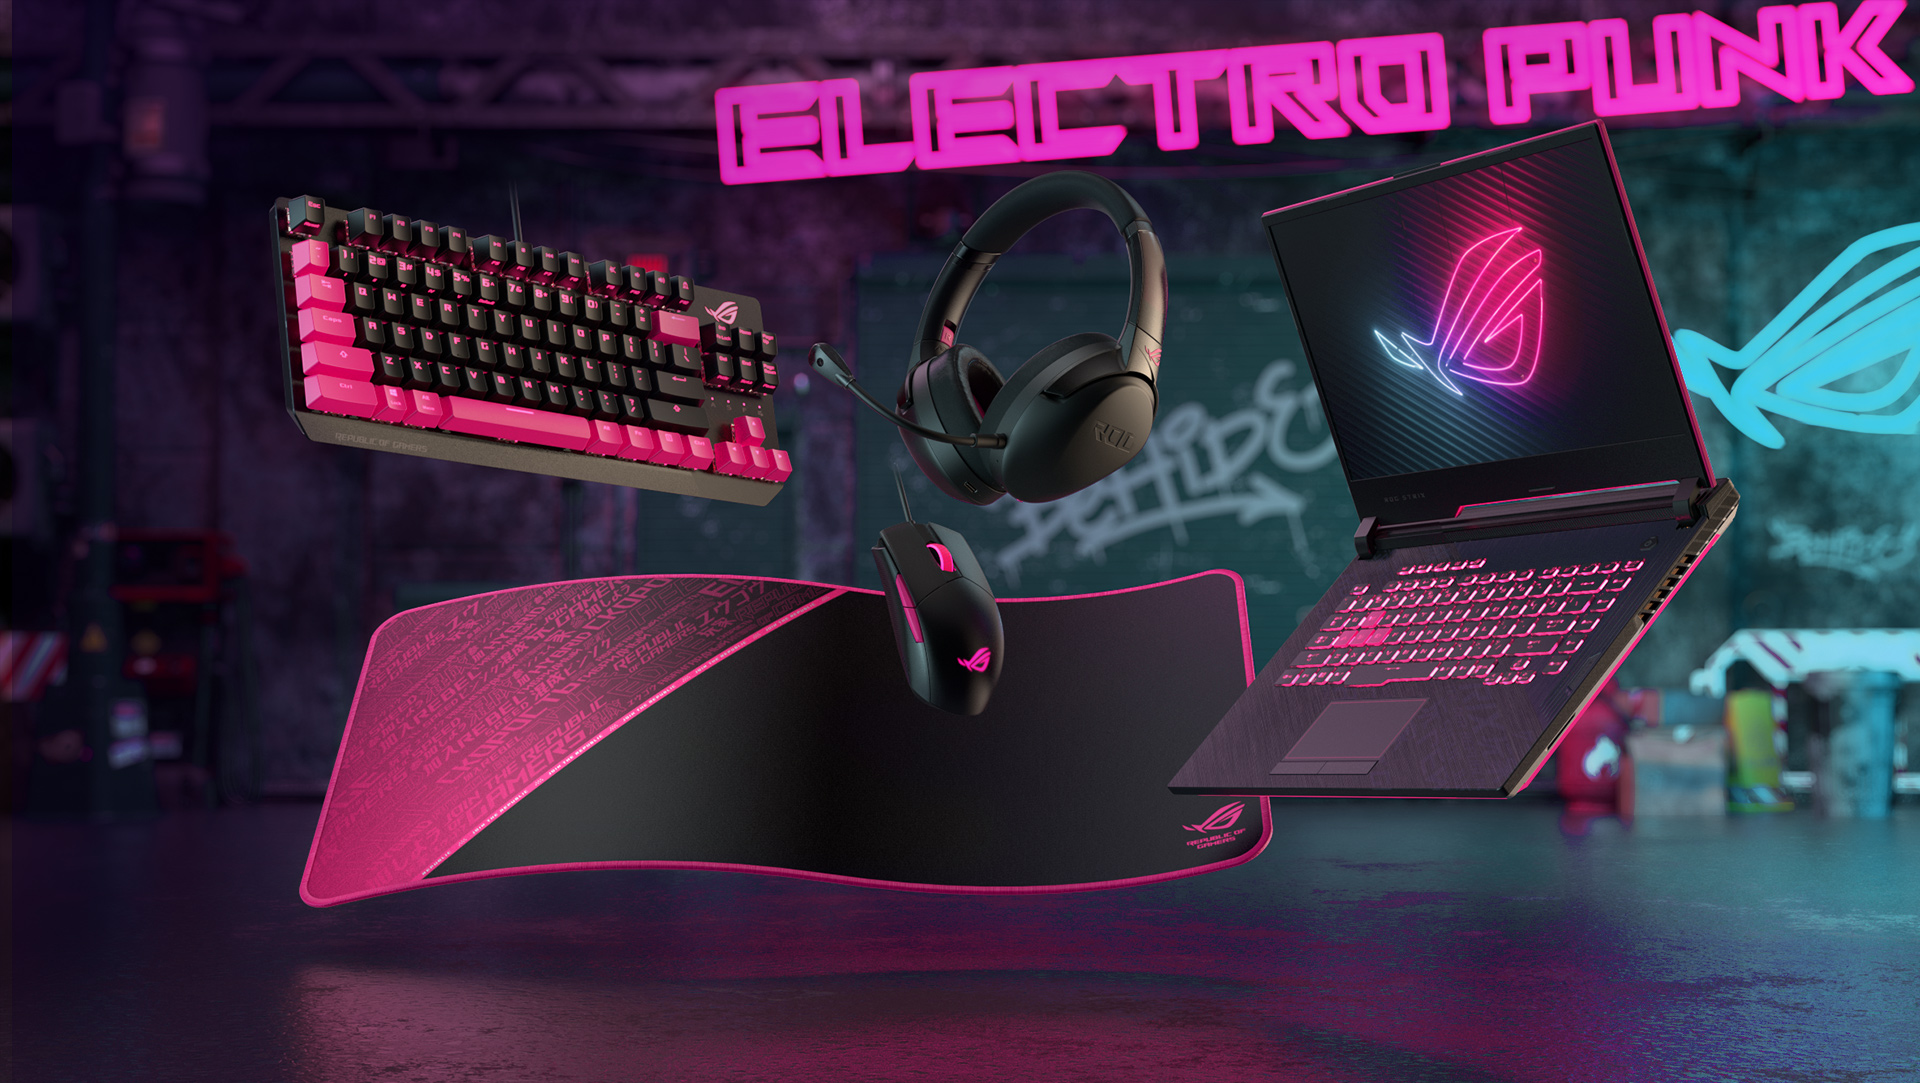 The ROG Electro Punk product series lineup